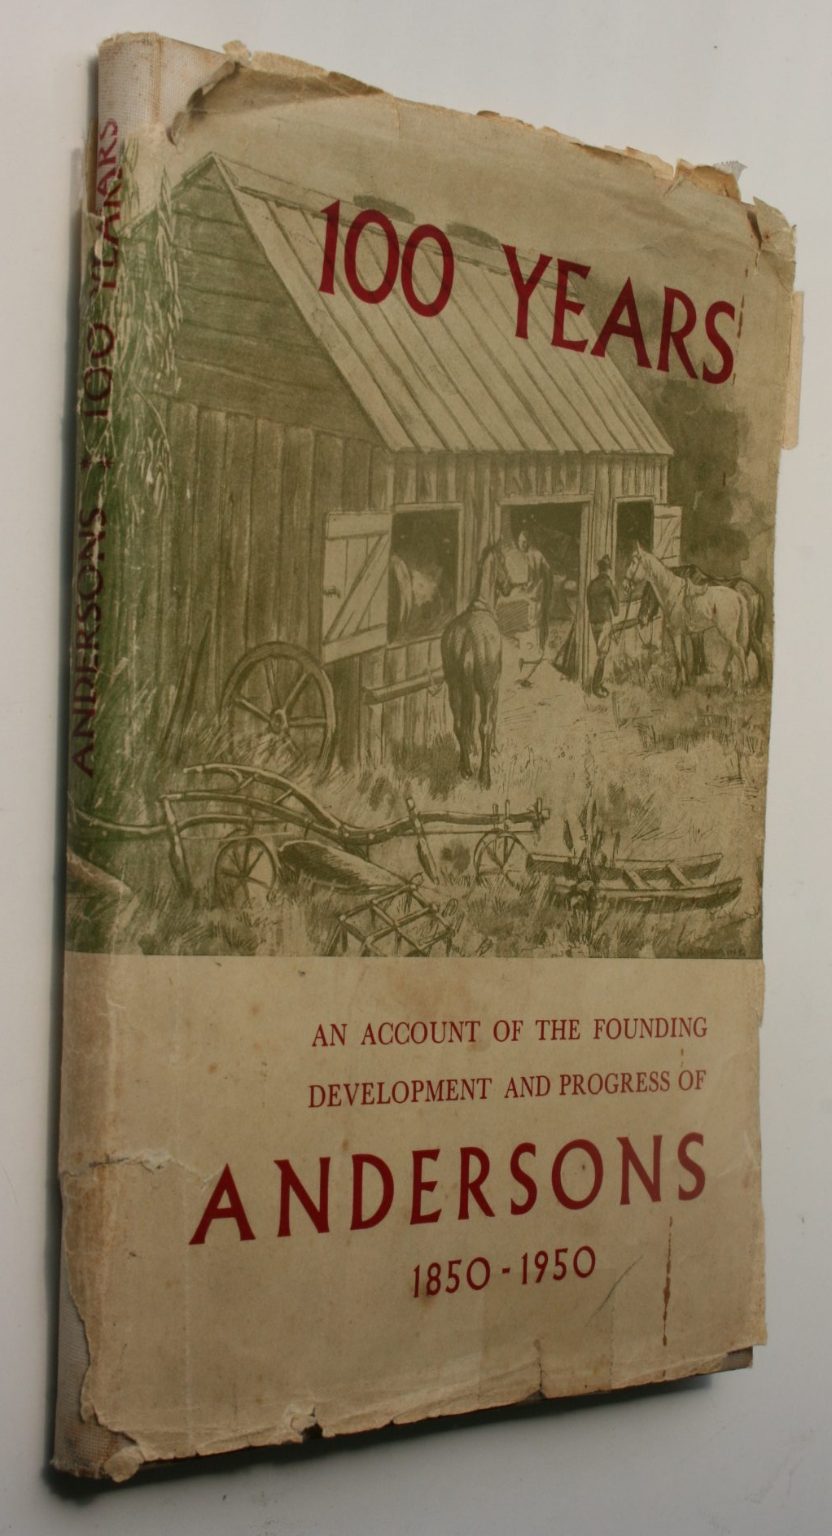 100 Years: Being an Account of the Founding, Development and Progress of Andersons, 1850-1950.